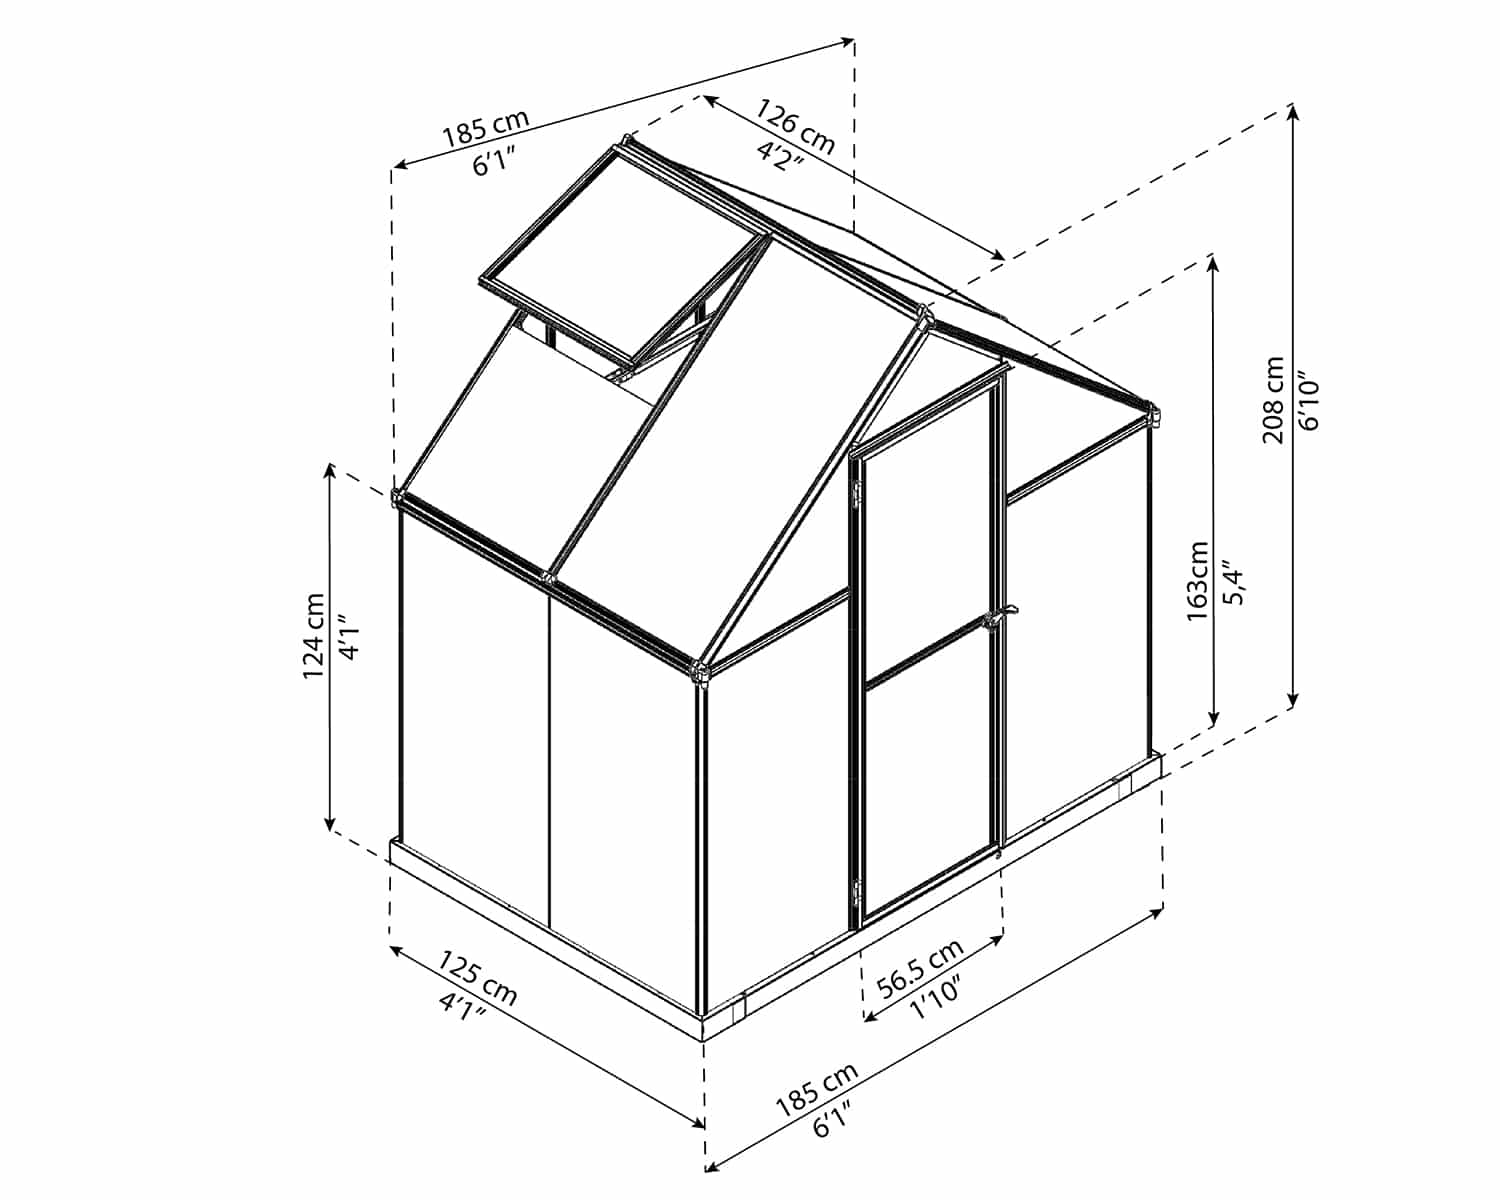 Mythos™ 6x6x4.ft Twin Wall Greenhouse - Dive To Garden